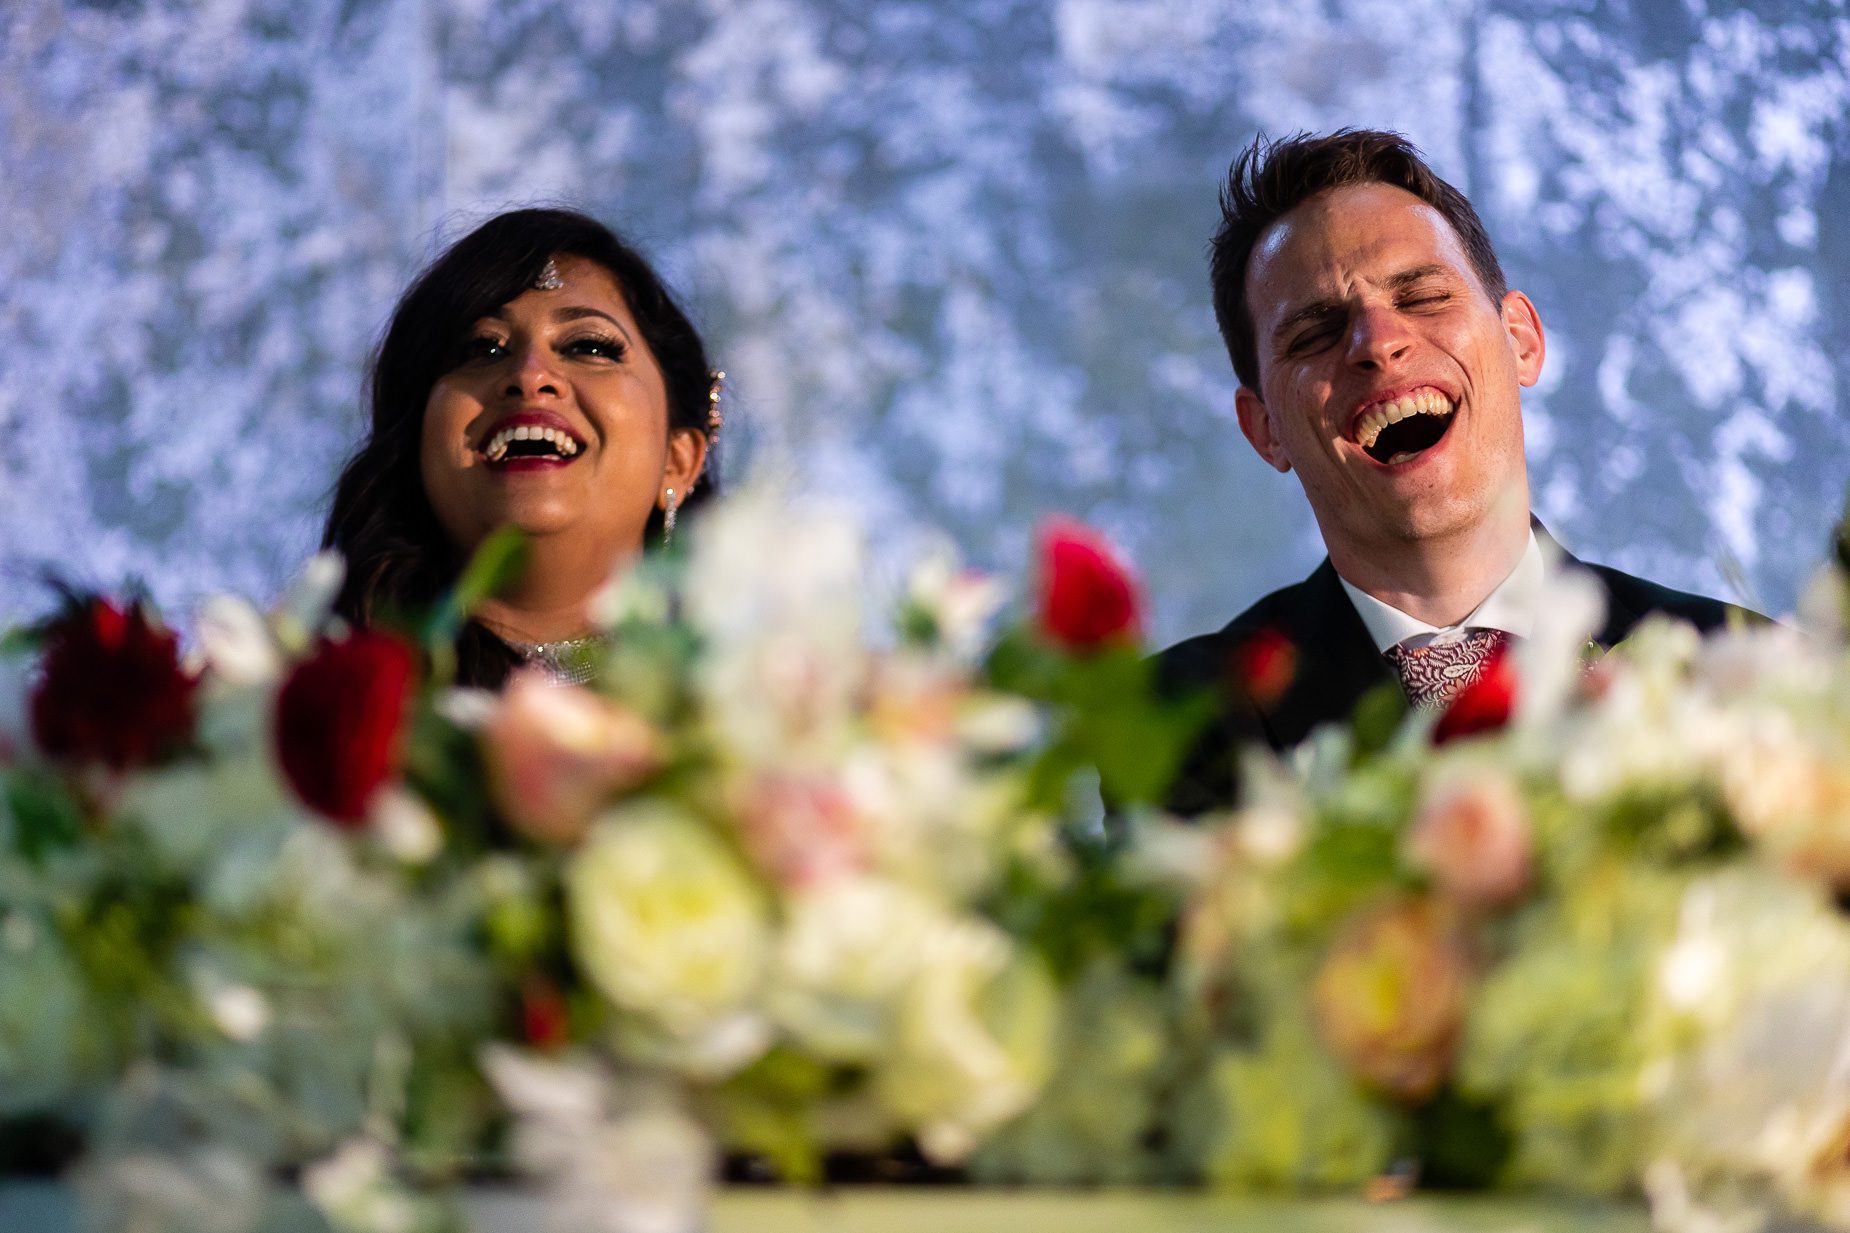 Bride and groom laughing